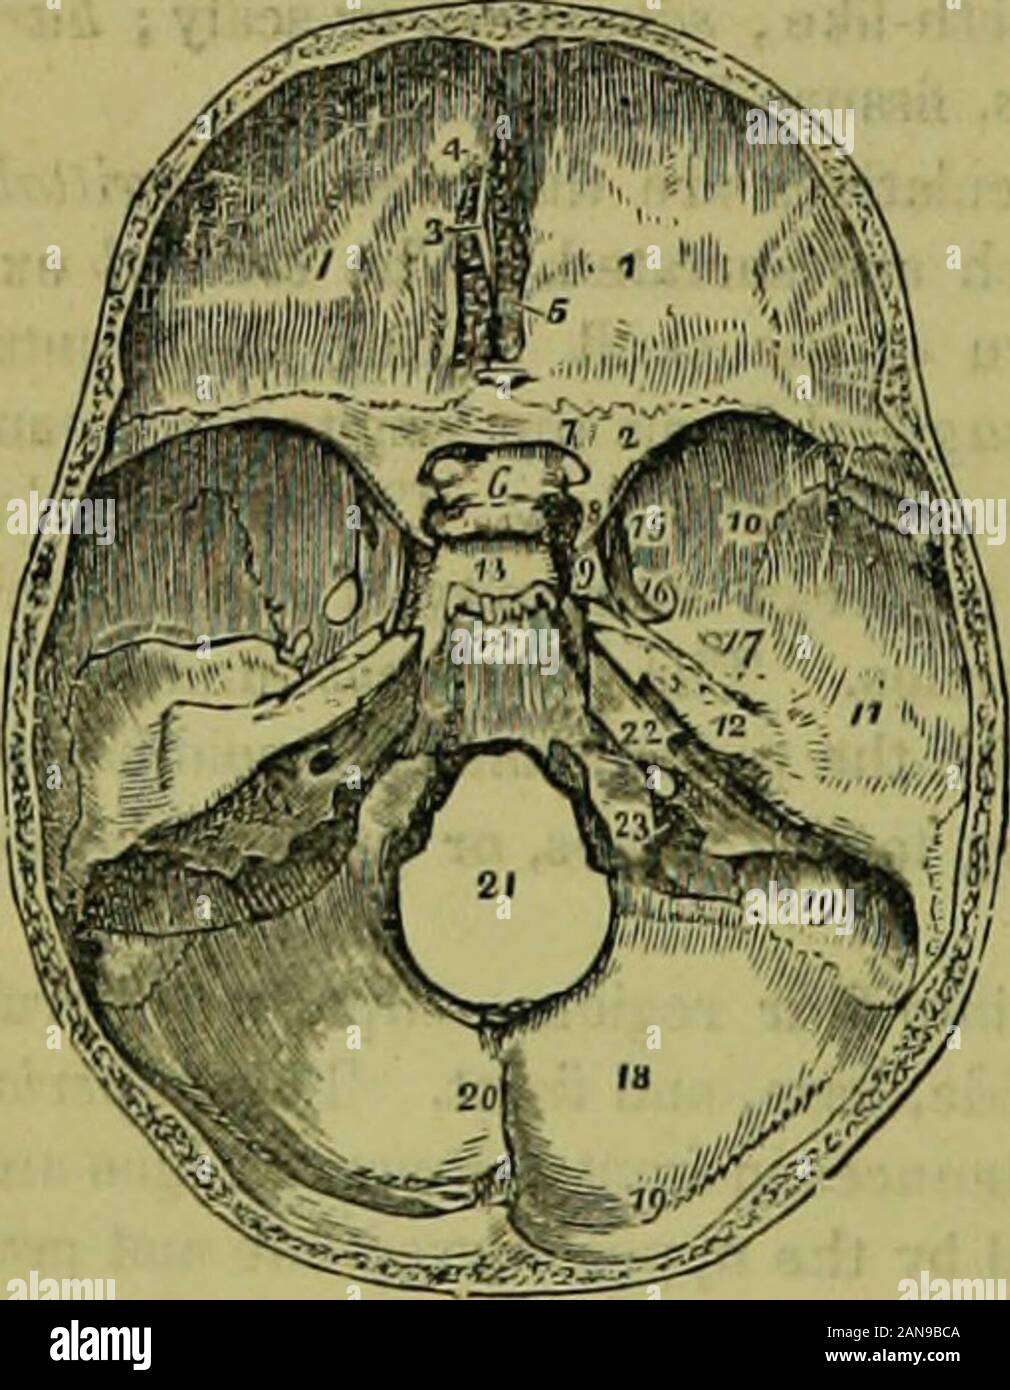 The hydropathic encyclopedia: a system of hydropathy and hygiene .. . id. 3. Crista galli. 4. Foramencaecum. 5. Cribriform lamella of the eth-moid. 6. The process called olivary. 7.Foramen opticum. 8. Anterior clinoidprocess. 9. The carotid groove on theside of the sella turcica, for the internalcarotid artery and cavernous sinus. 10,11, 12. Middle fossa of the base of theskull: 10 marks the great ala of the sphe-noid ; 11, the squamous portion of thetemporal bone; 12, the petrous portion.13. The sella turcica. 14. Basilar portionof sphenoid and occipital bones. Theuneven ridge between 13 and Stock Photo